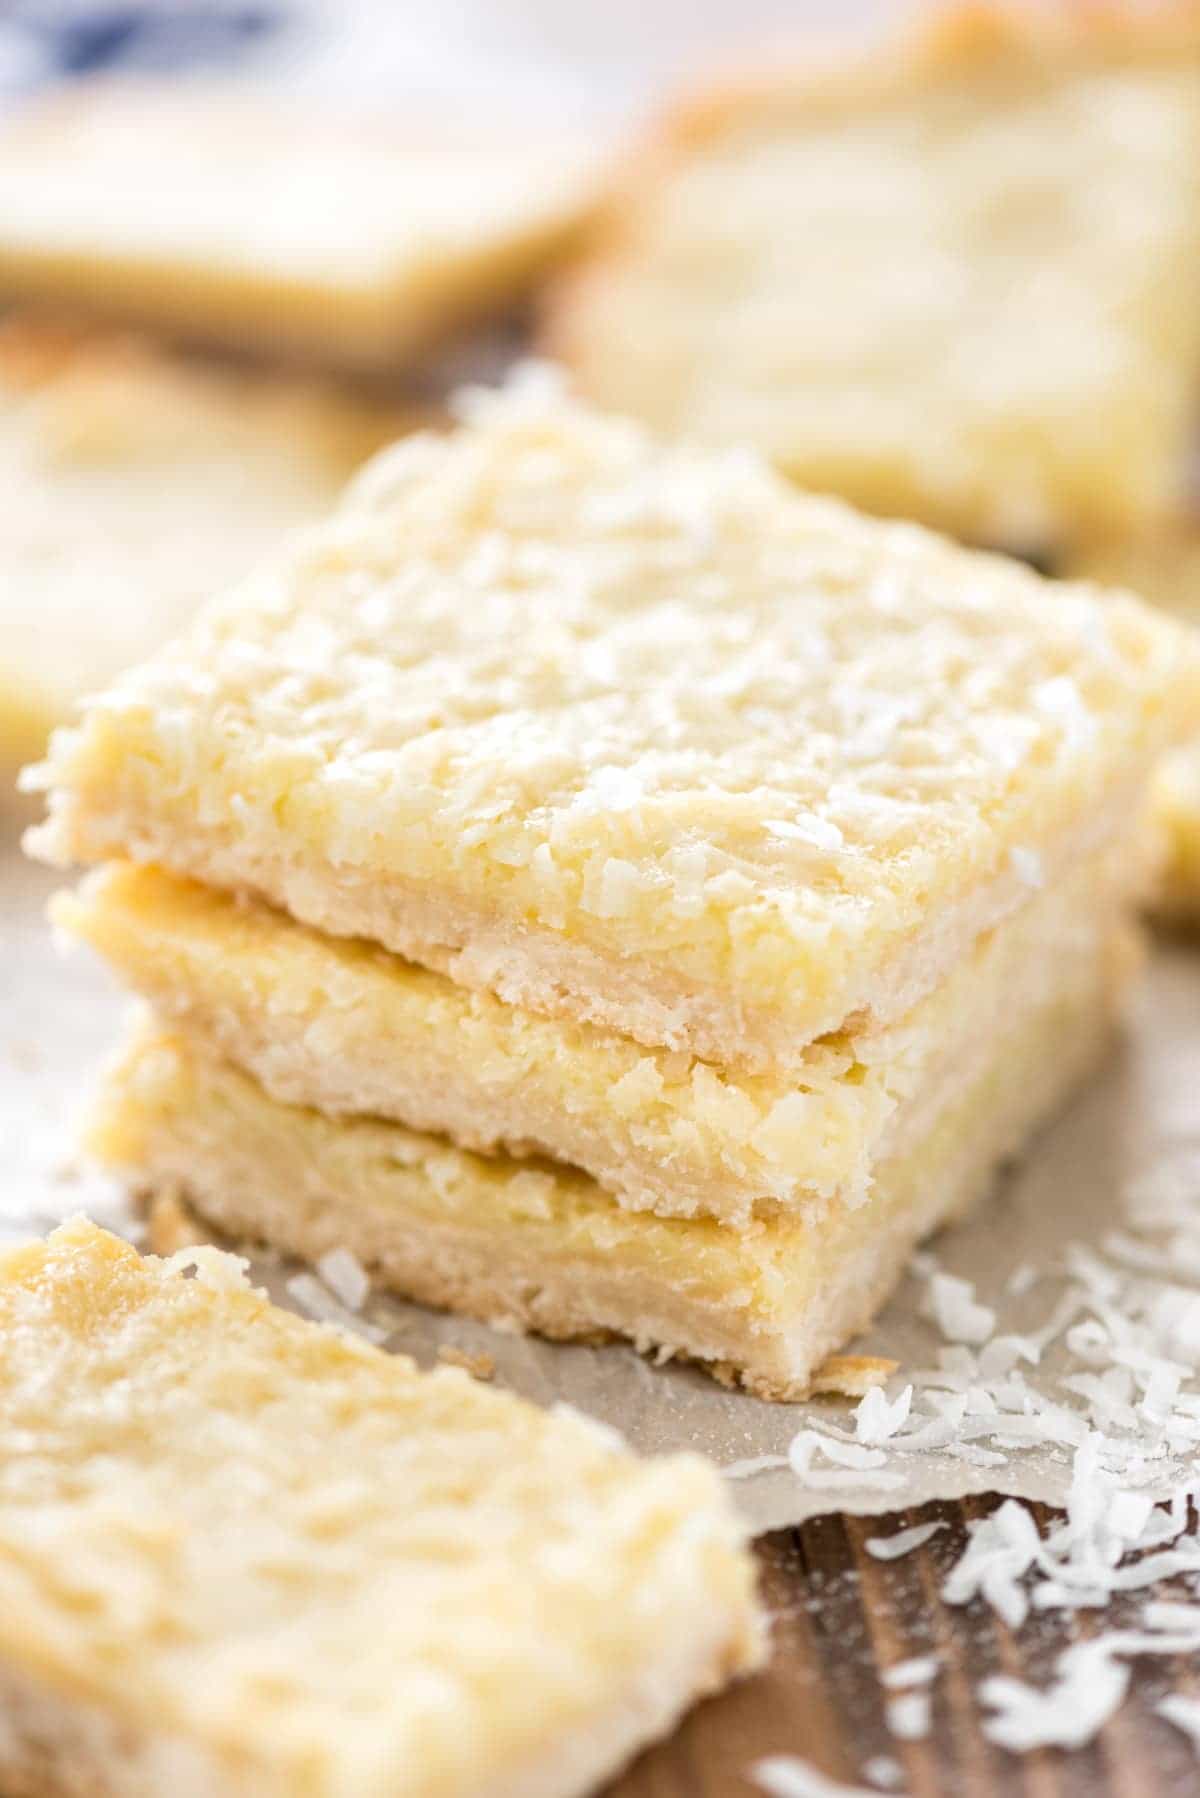 Gooey Coconut Pie Bars - this easy bar recipe has a shortbread crust topped with a gooey coconut filling. The perfect gooey coconut bar!